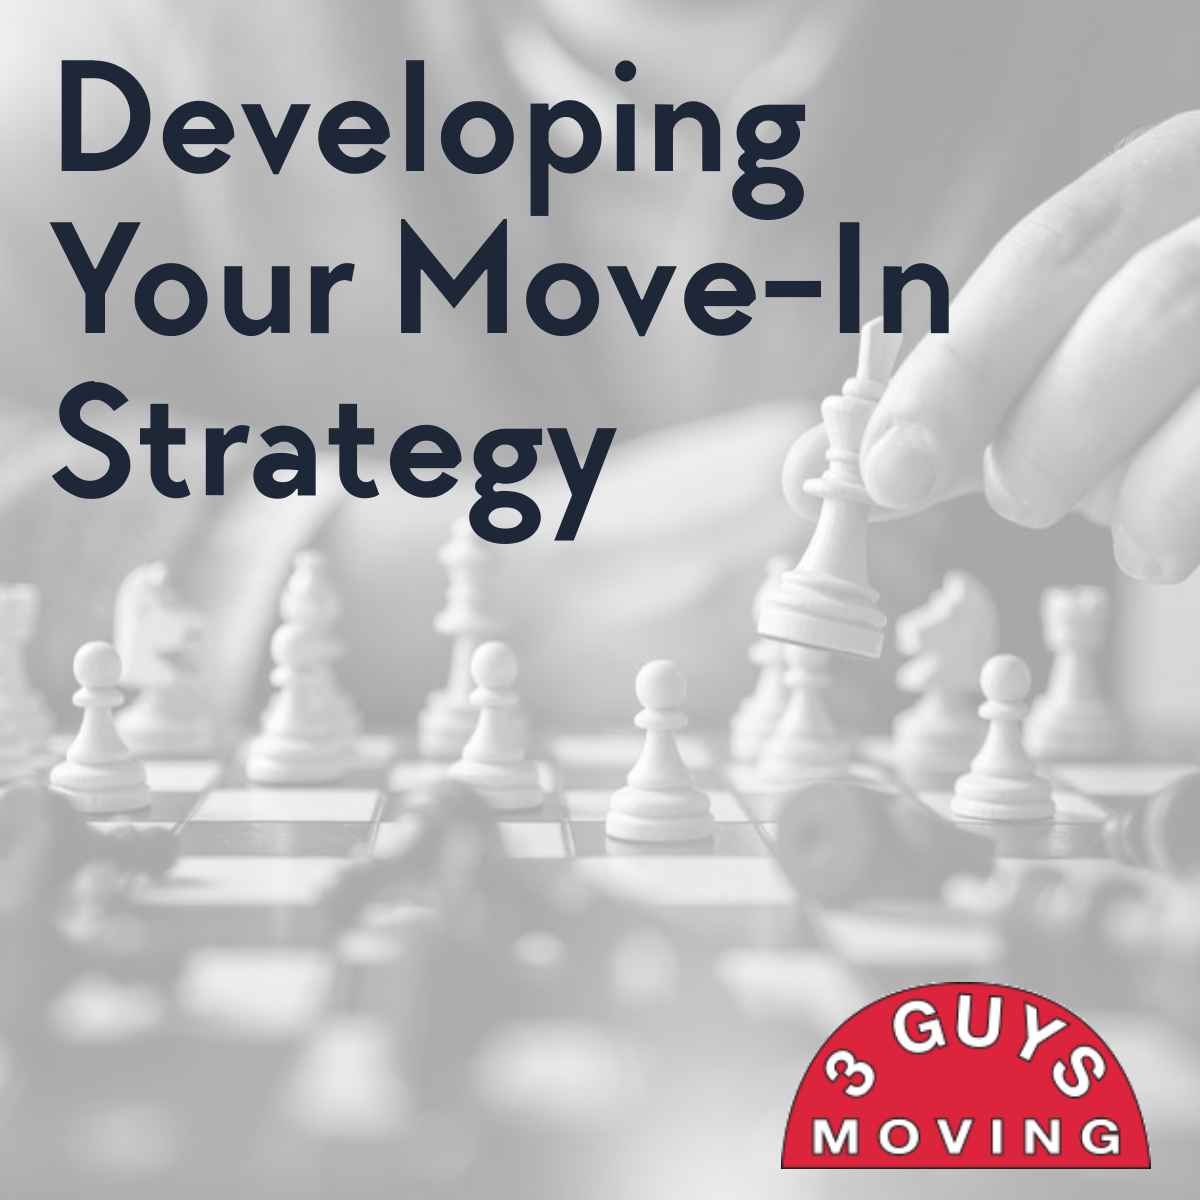 Developing Your Move In Strategy - Developing Your Move-In Strategy